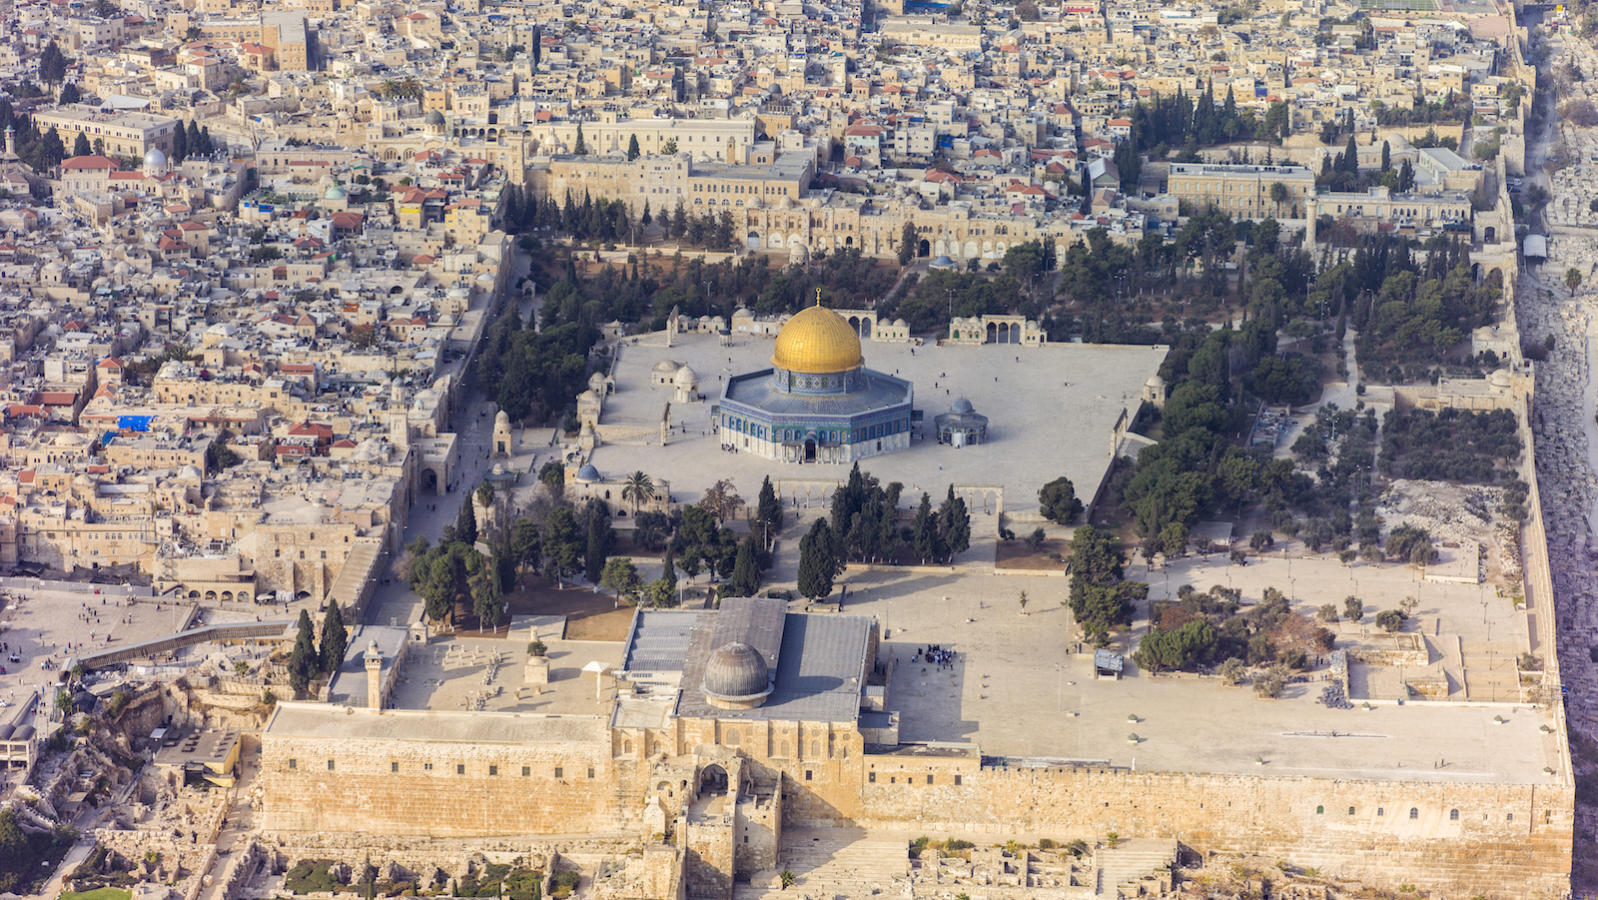 andrew-shiva-wikipedia-temple-mount-aerial-view-1598x900